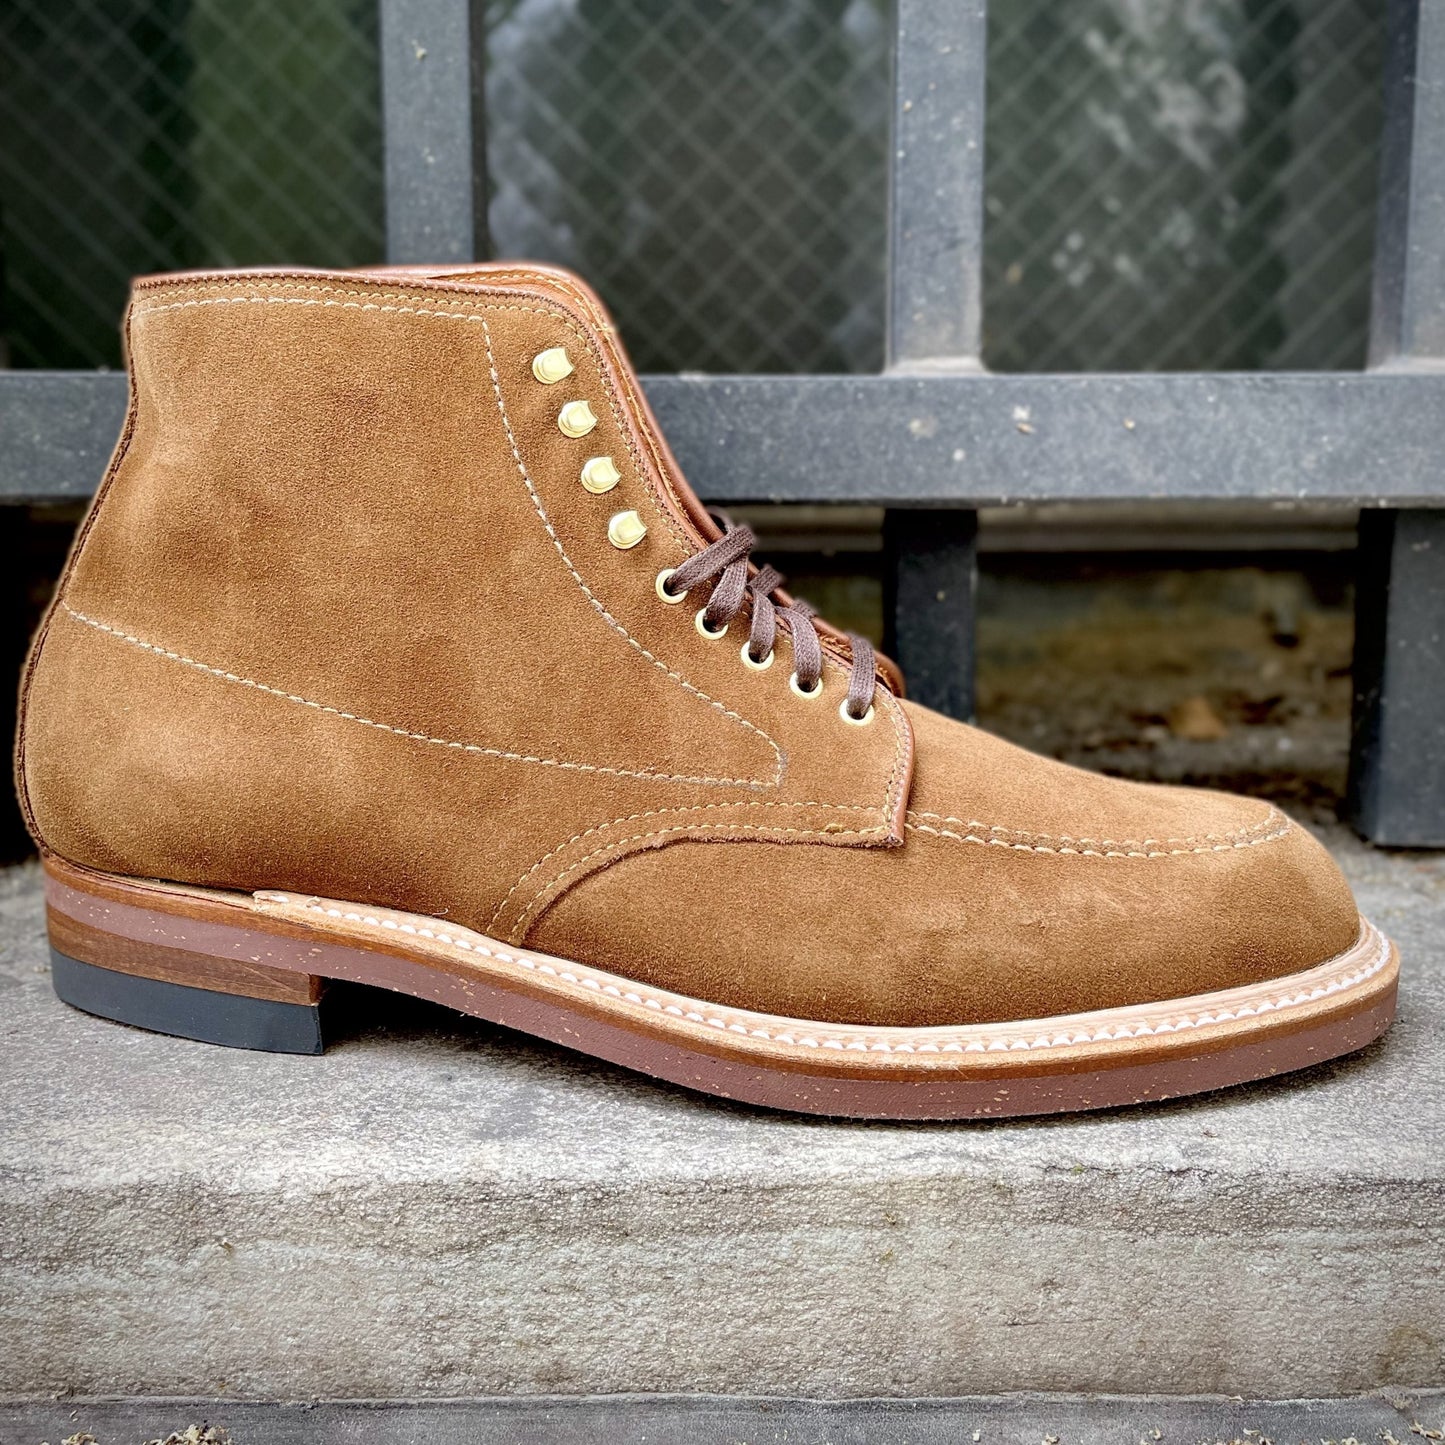 D1903H - "Dade" Indy Boot in Snuff Suede